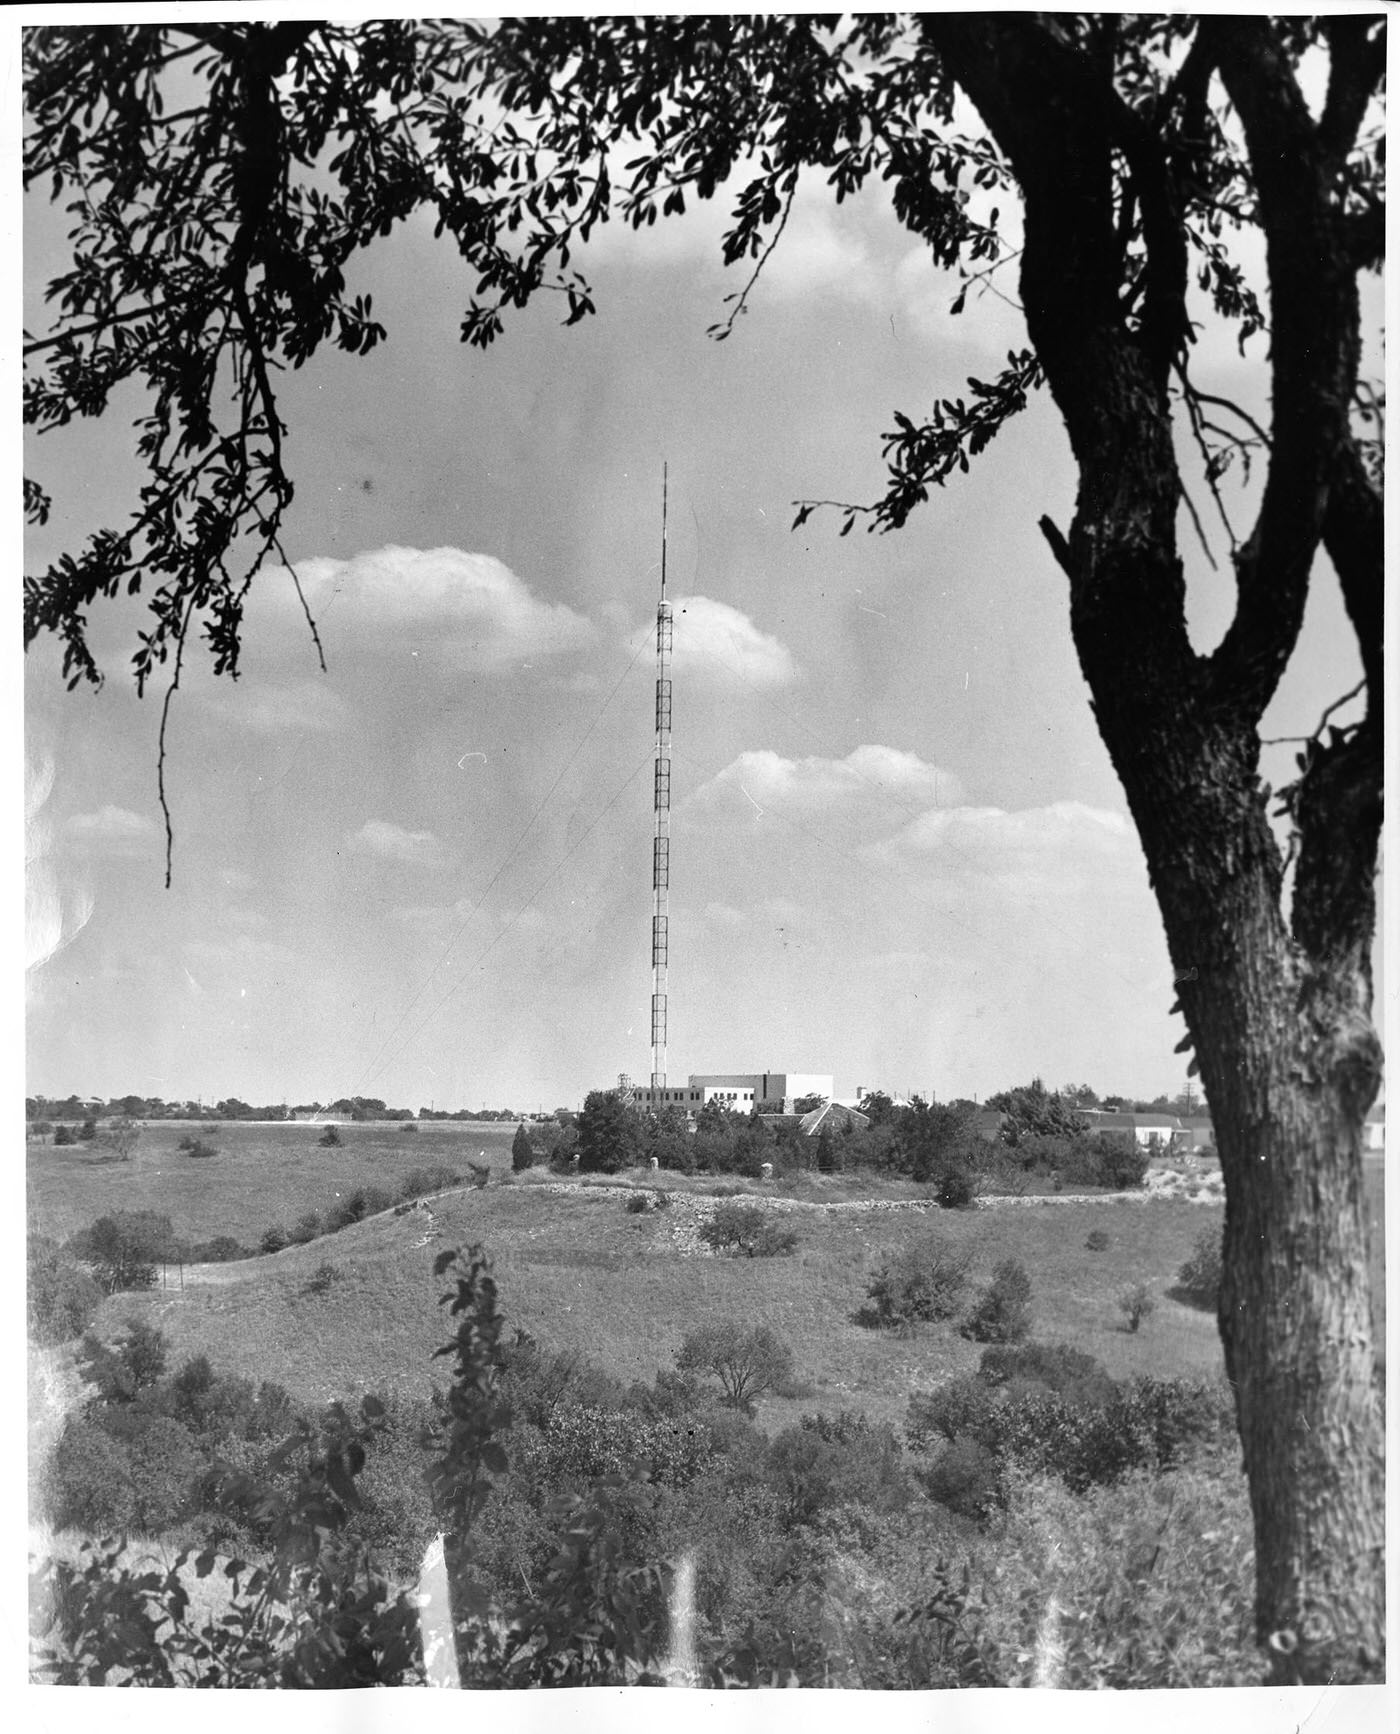 WBAP-TV building and transmitting tower on a knoll in east Fort Worth, Texas, 1948